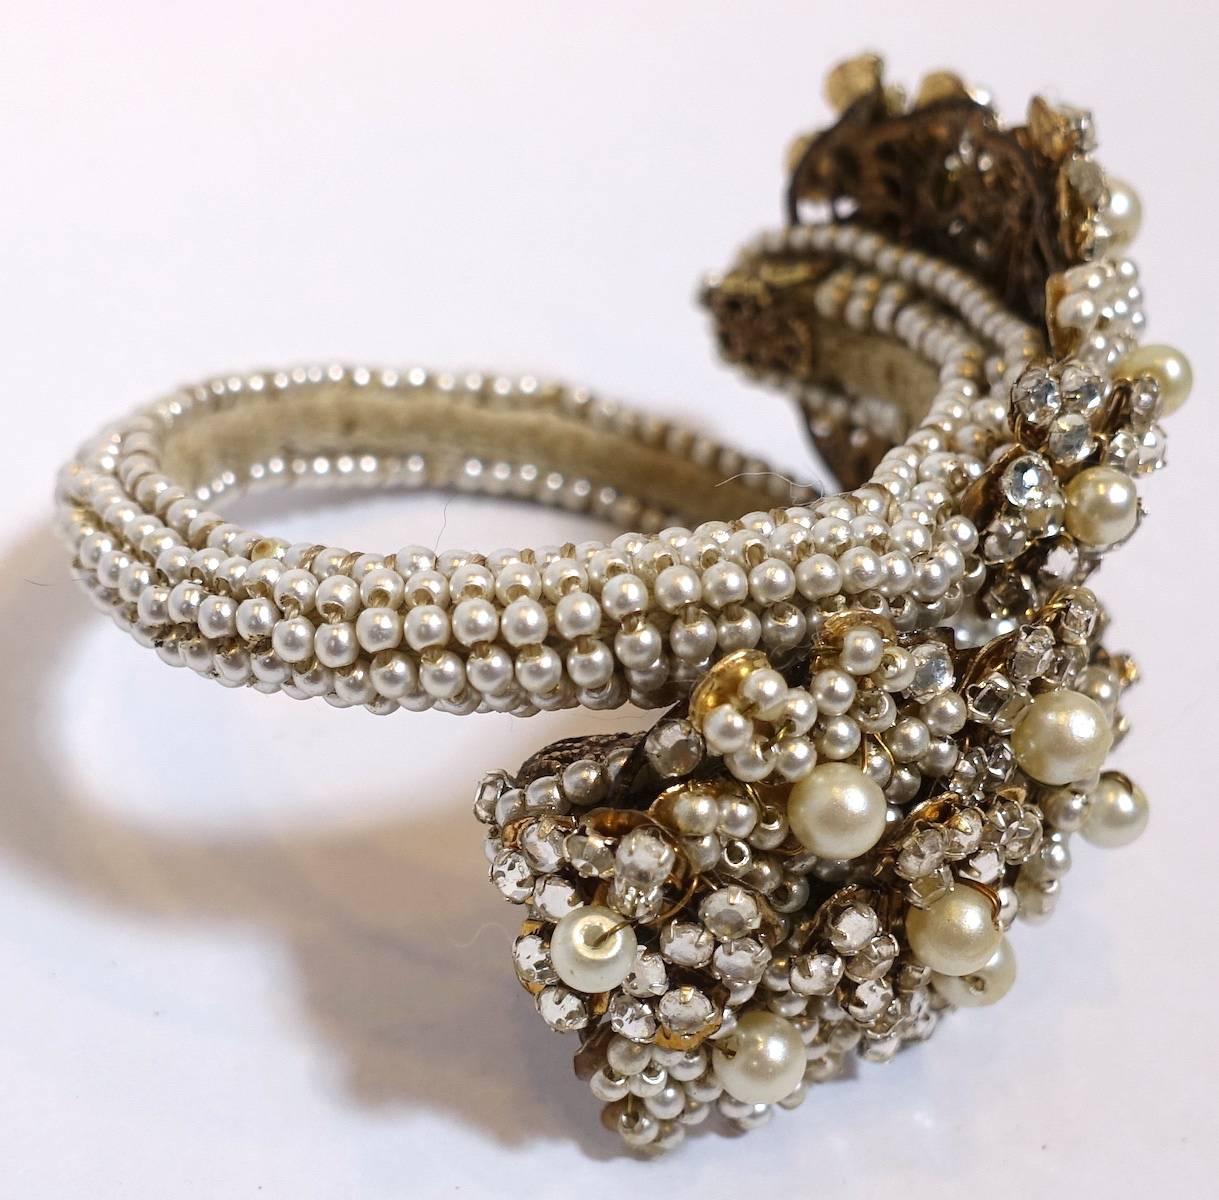 This early vintage Miriam Haskell wrap bracelet features faux pearls with crystal accents in a gold-plated base metal setting.  In excellent condition, this Miriam Haskell bracelet unwraps to approx. 10” and will fit a wrist of size 6-7.  The